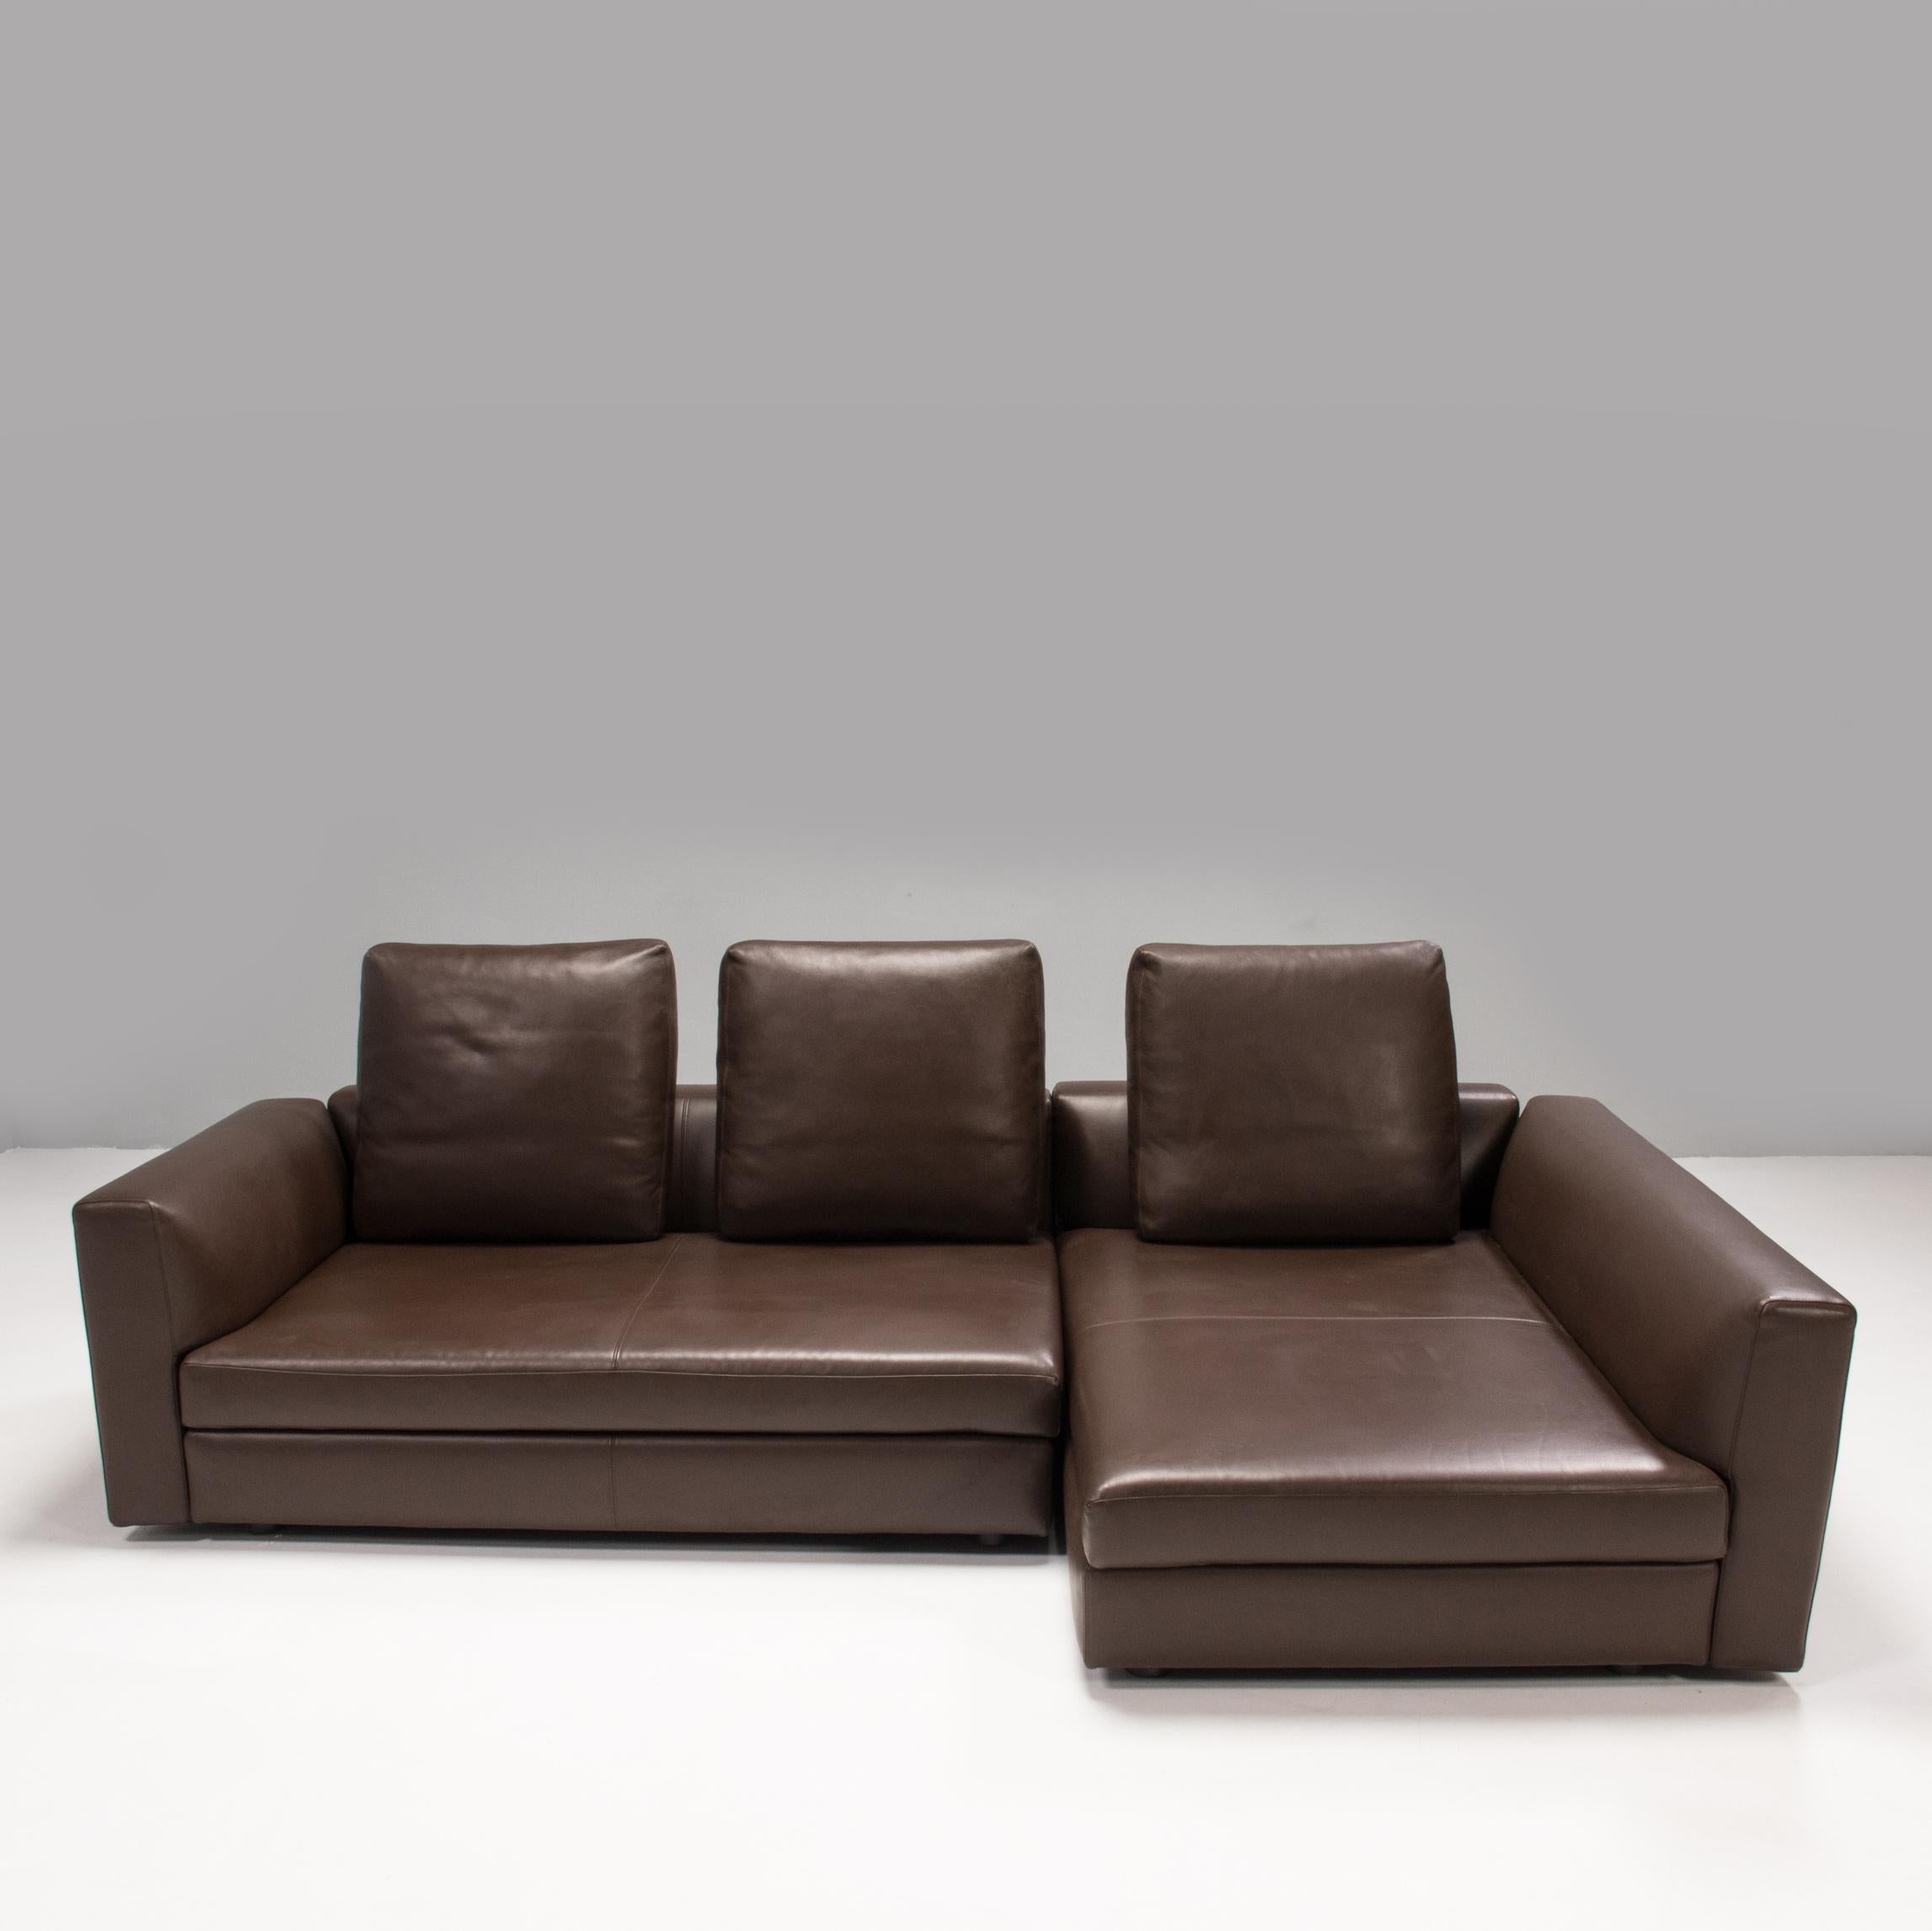 Designed and manufactured by Minotti, this corner sofa comprises of two separate sections.

Fully upholstered in brown leather, the sofa features integrated back cushions and armrests, with a separate seat cushion on each unit.

Three additional